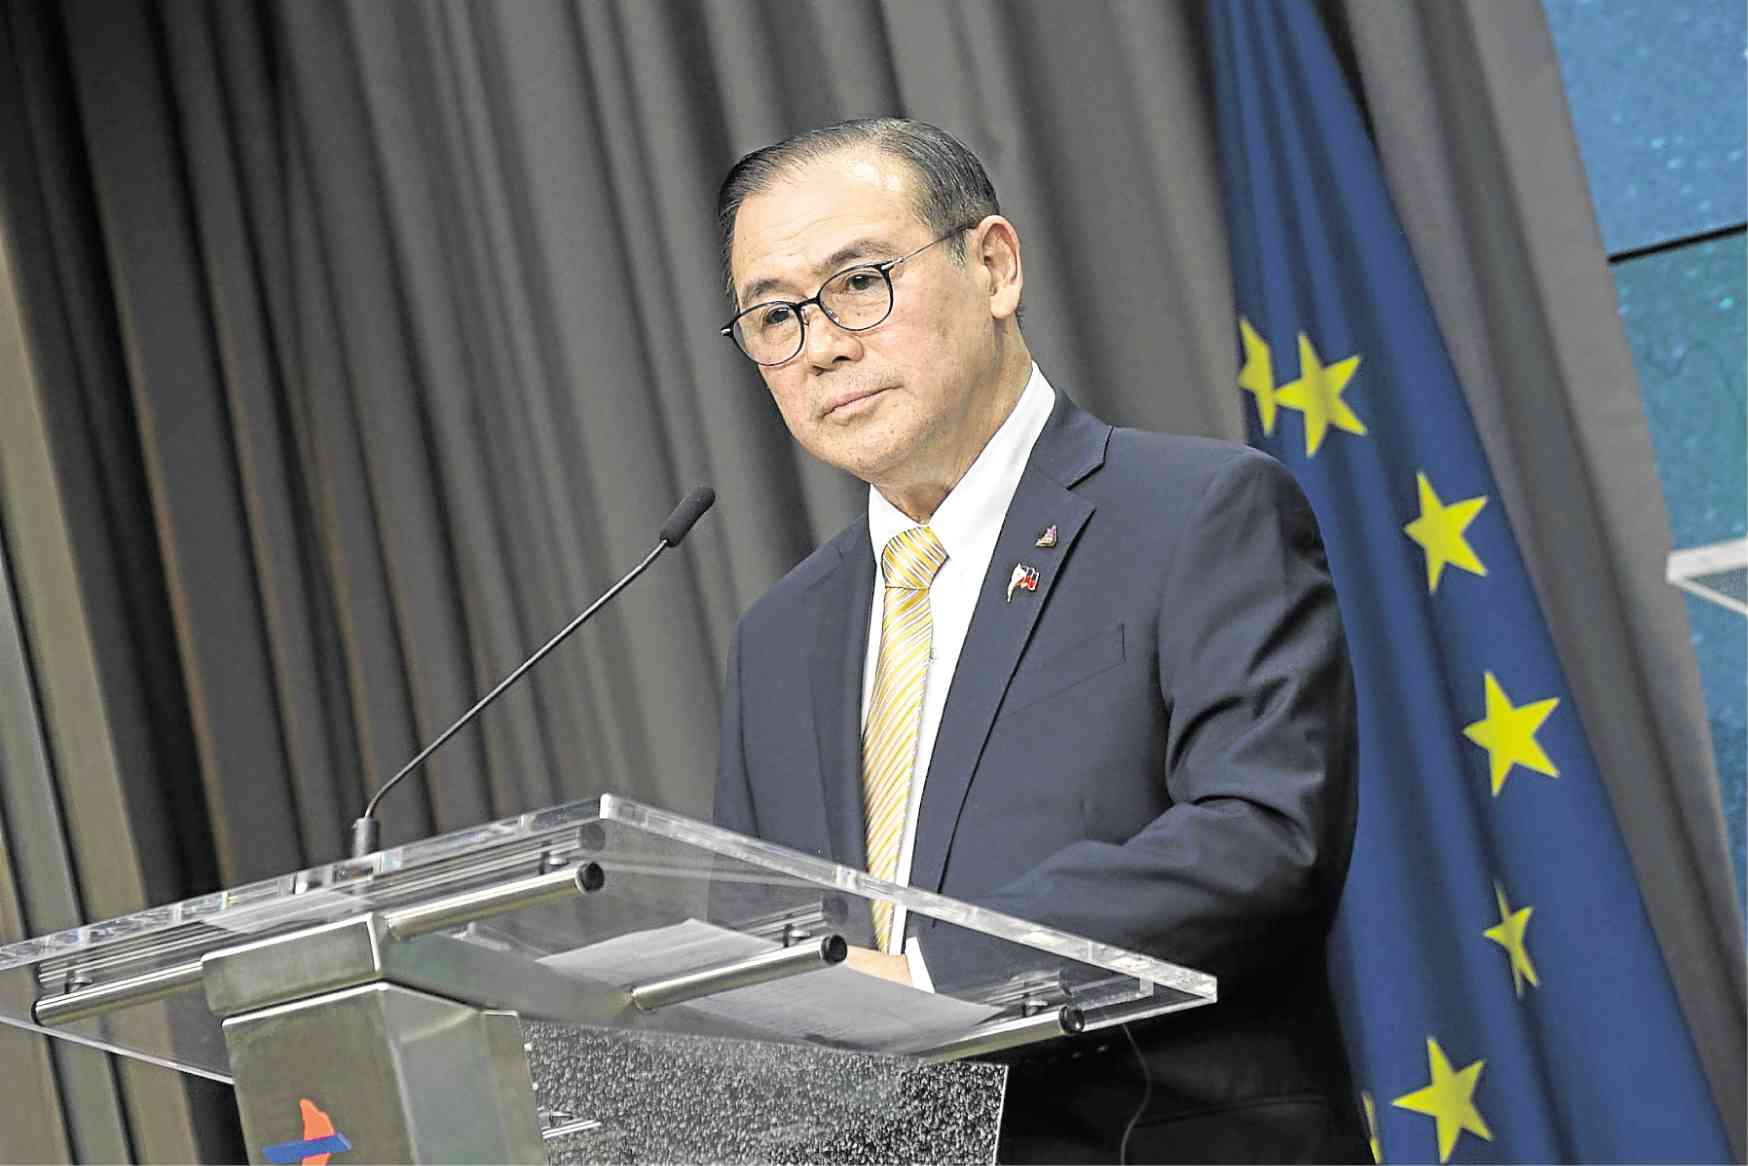 Locsin to embark on 2-day visit to Vietnam